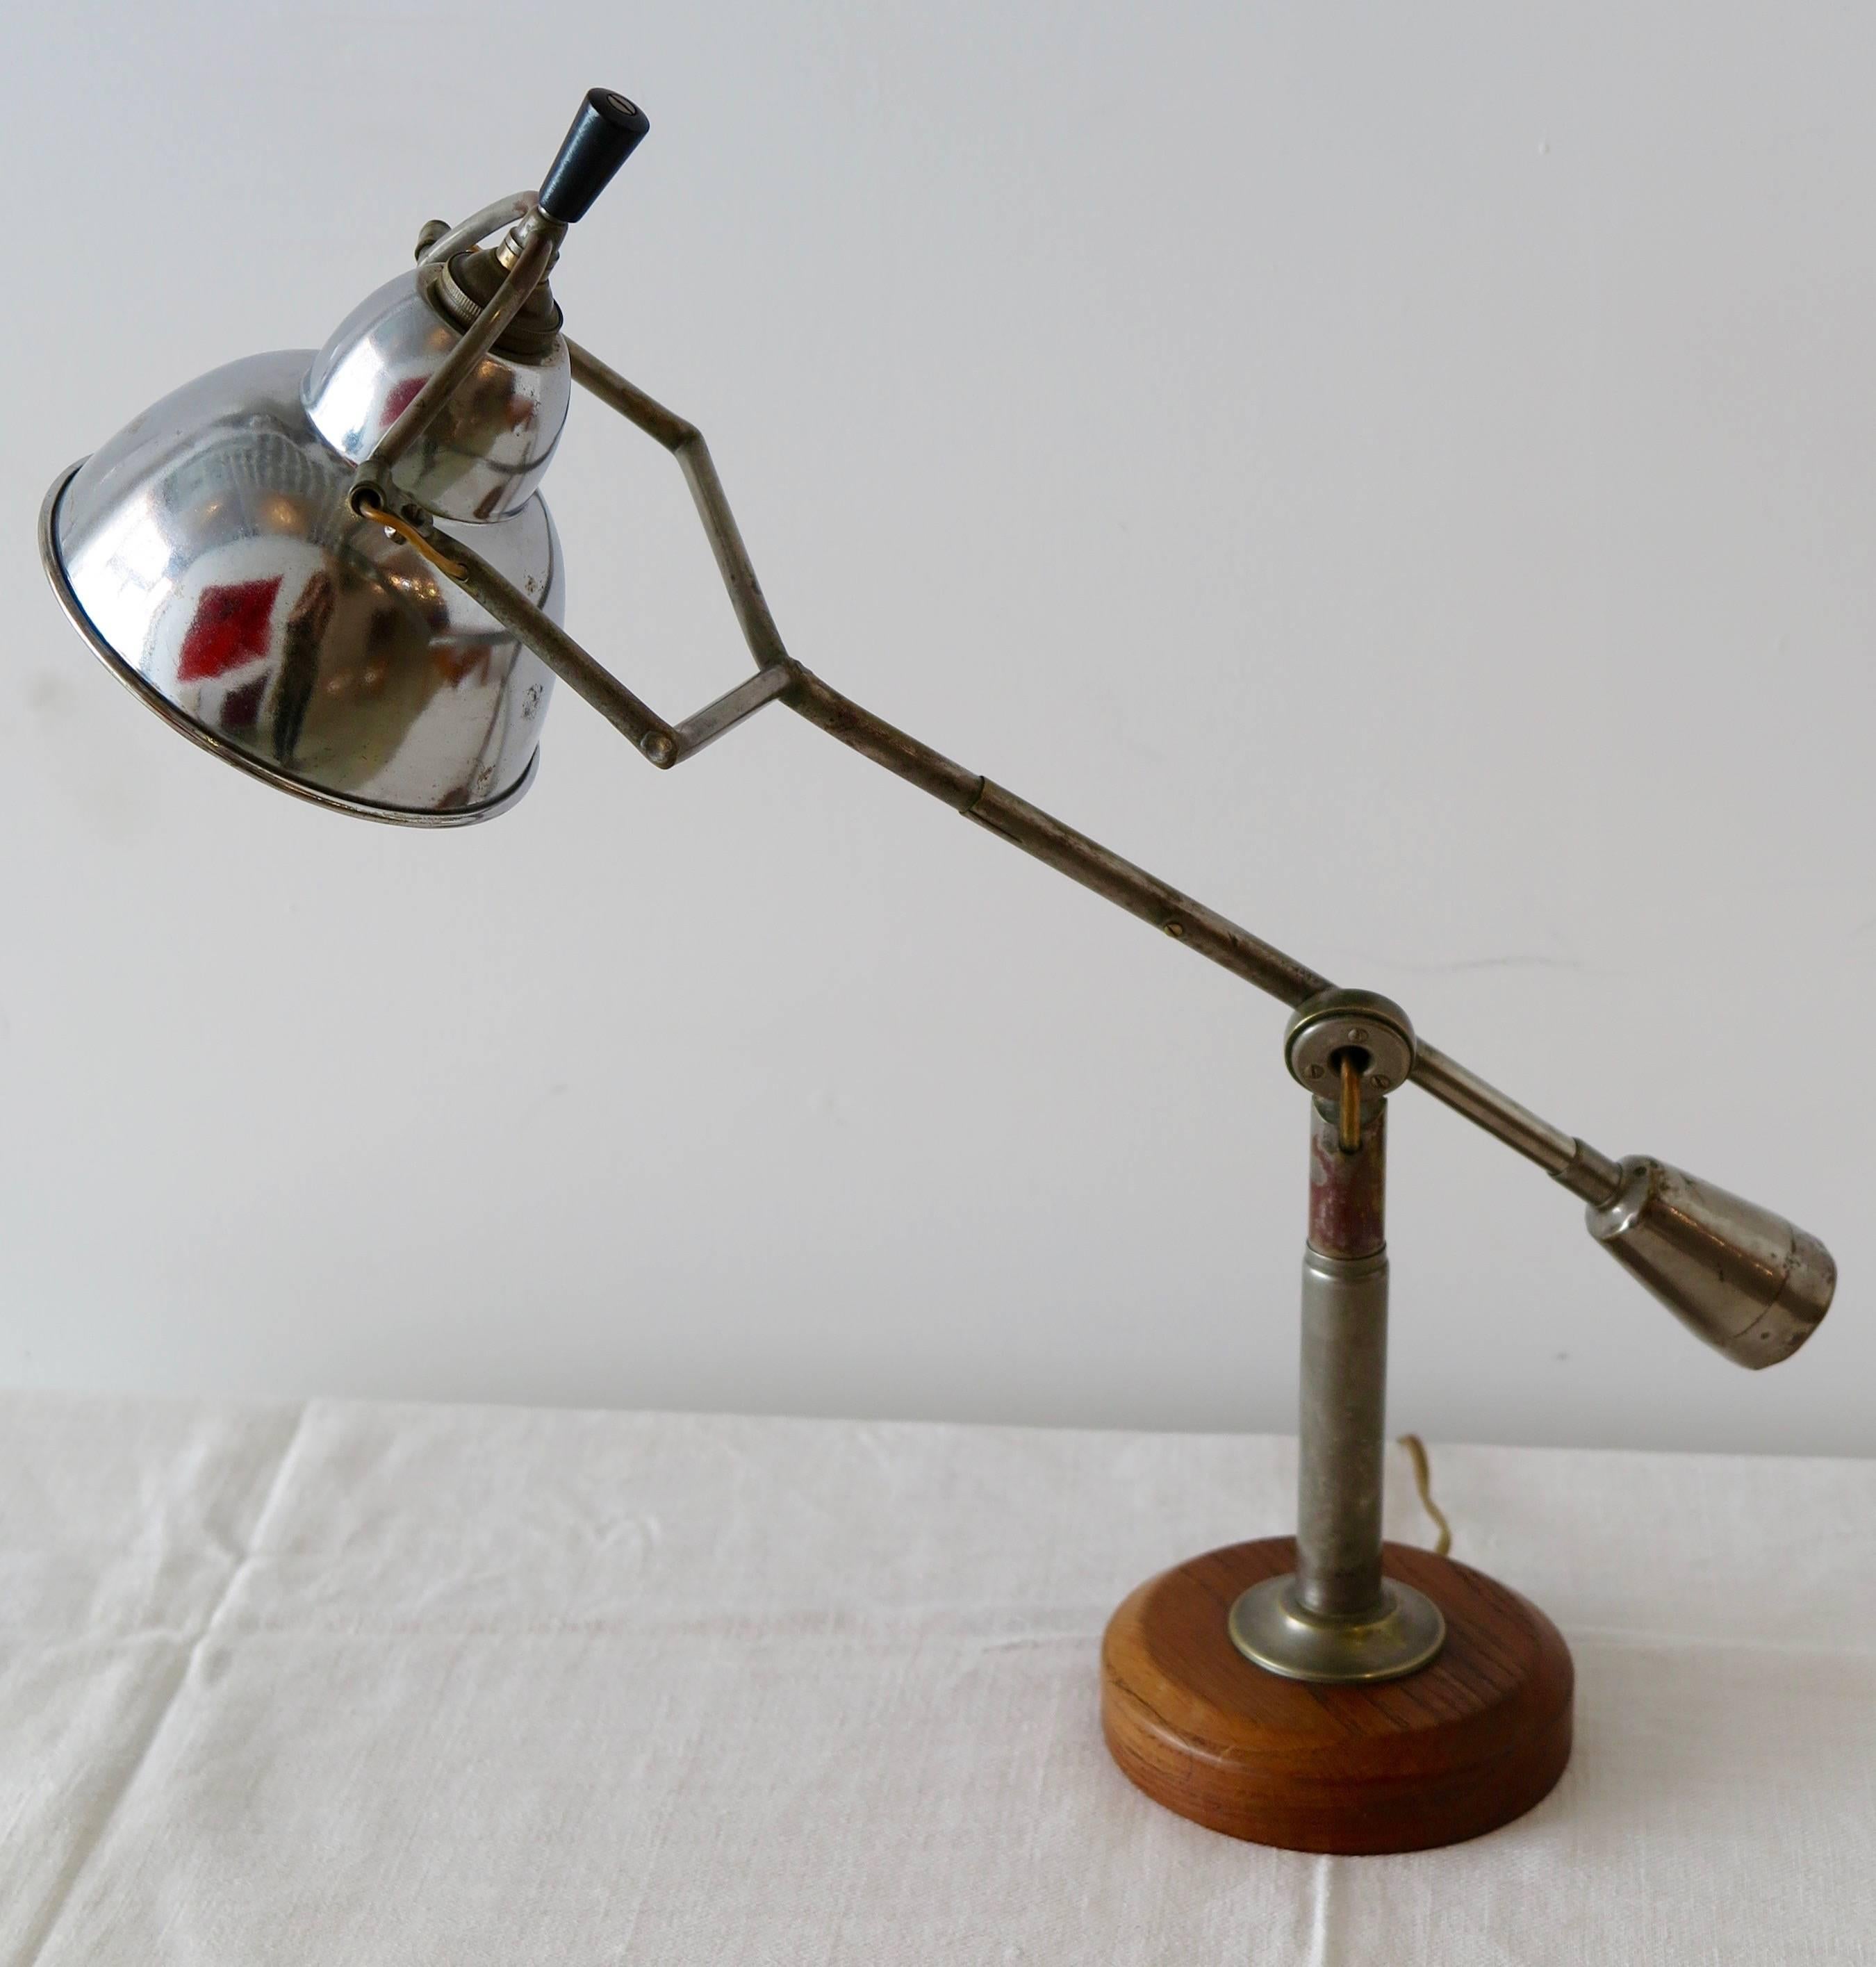 Adjustable desk lamp in nickel-plated metal and aluminum with a wood base by Edouard Wilfred Buquet, France, circa 1927.
Not restored, in original condition.